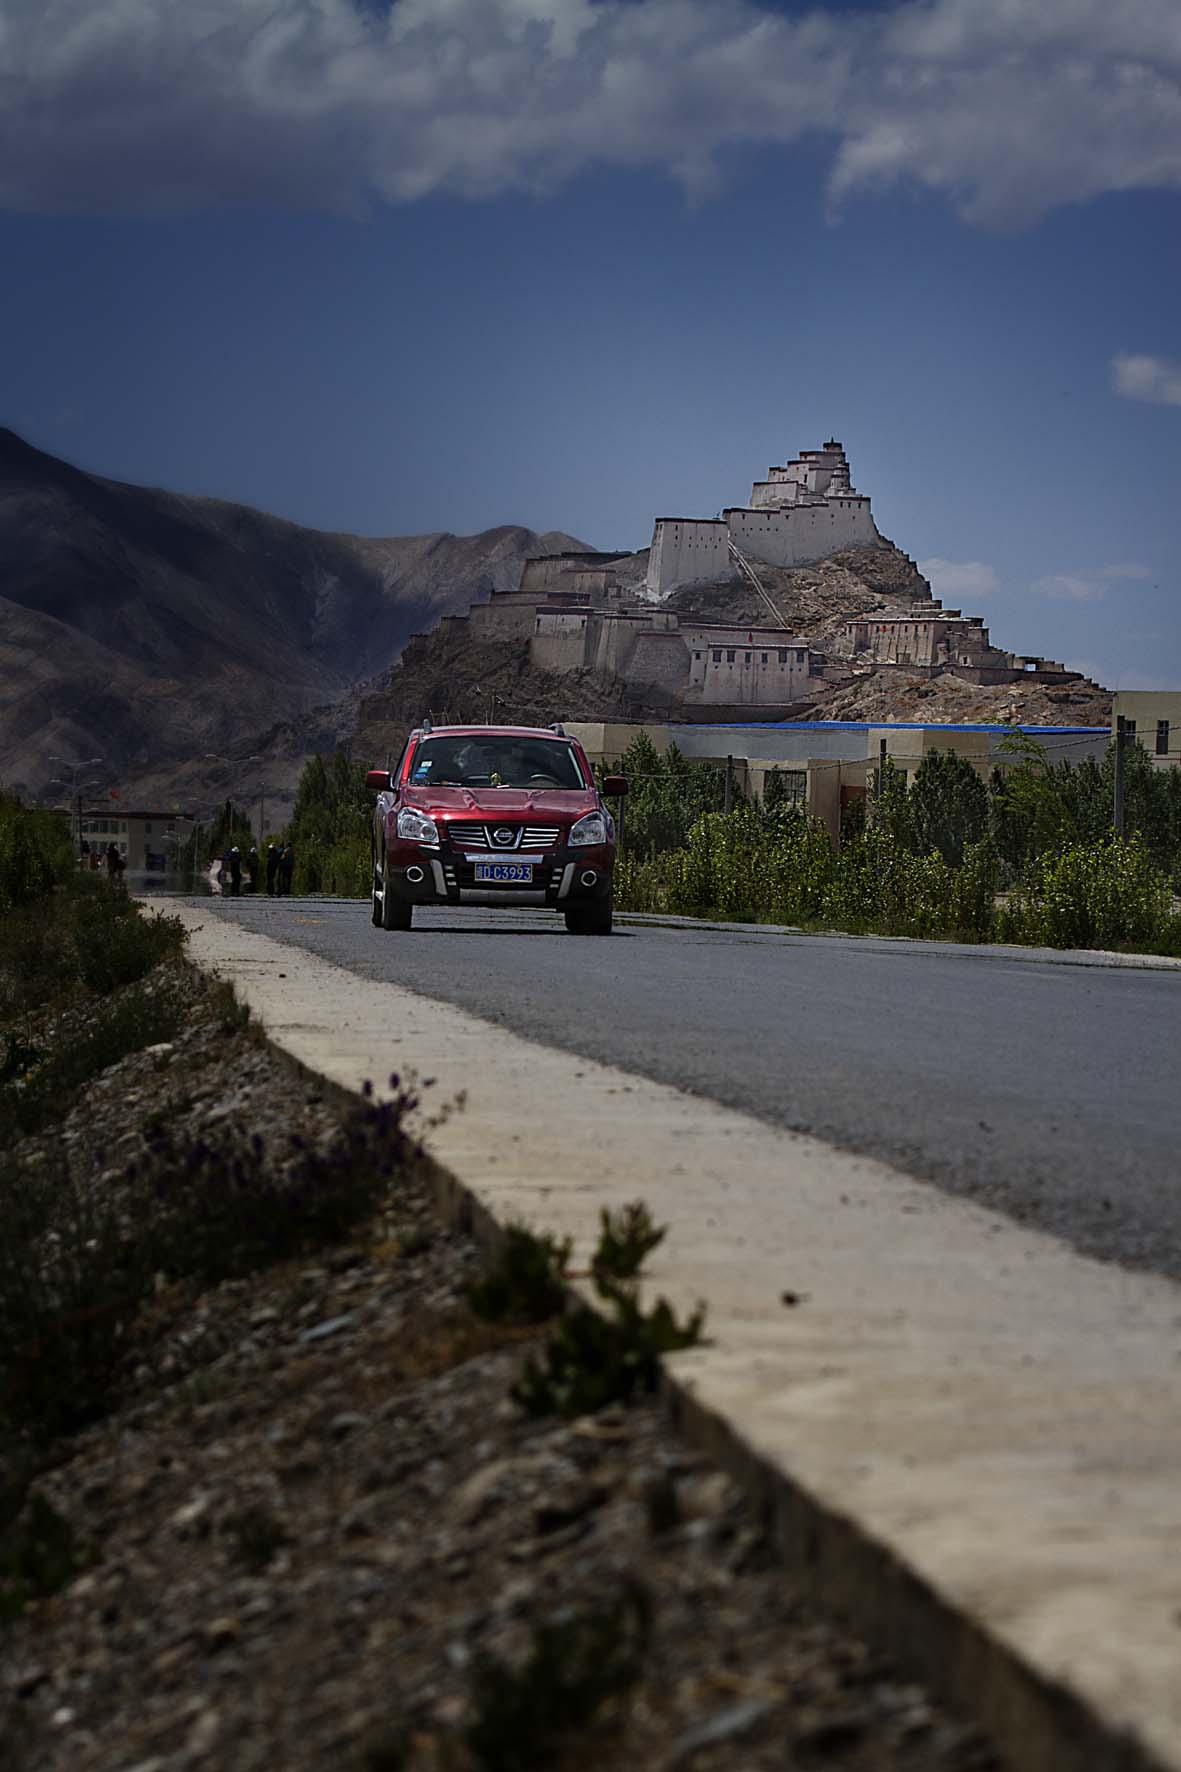 Gyantse fort photographed by me in July 2012